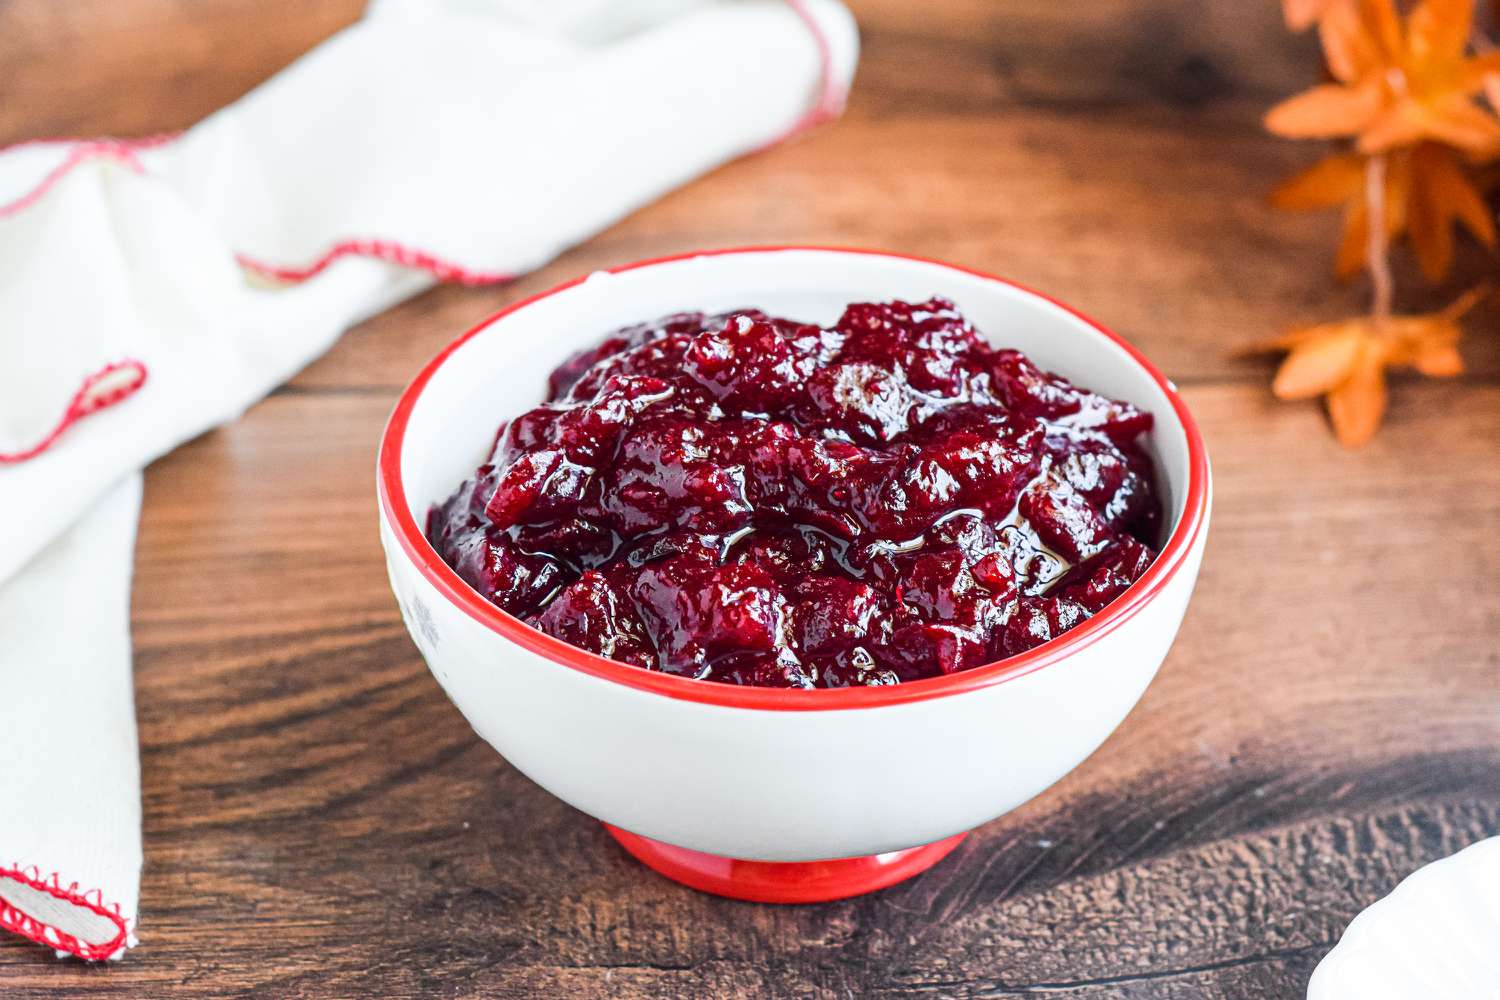 Homecrafted Cranberry Sauce